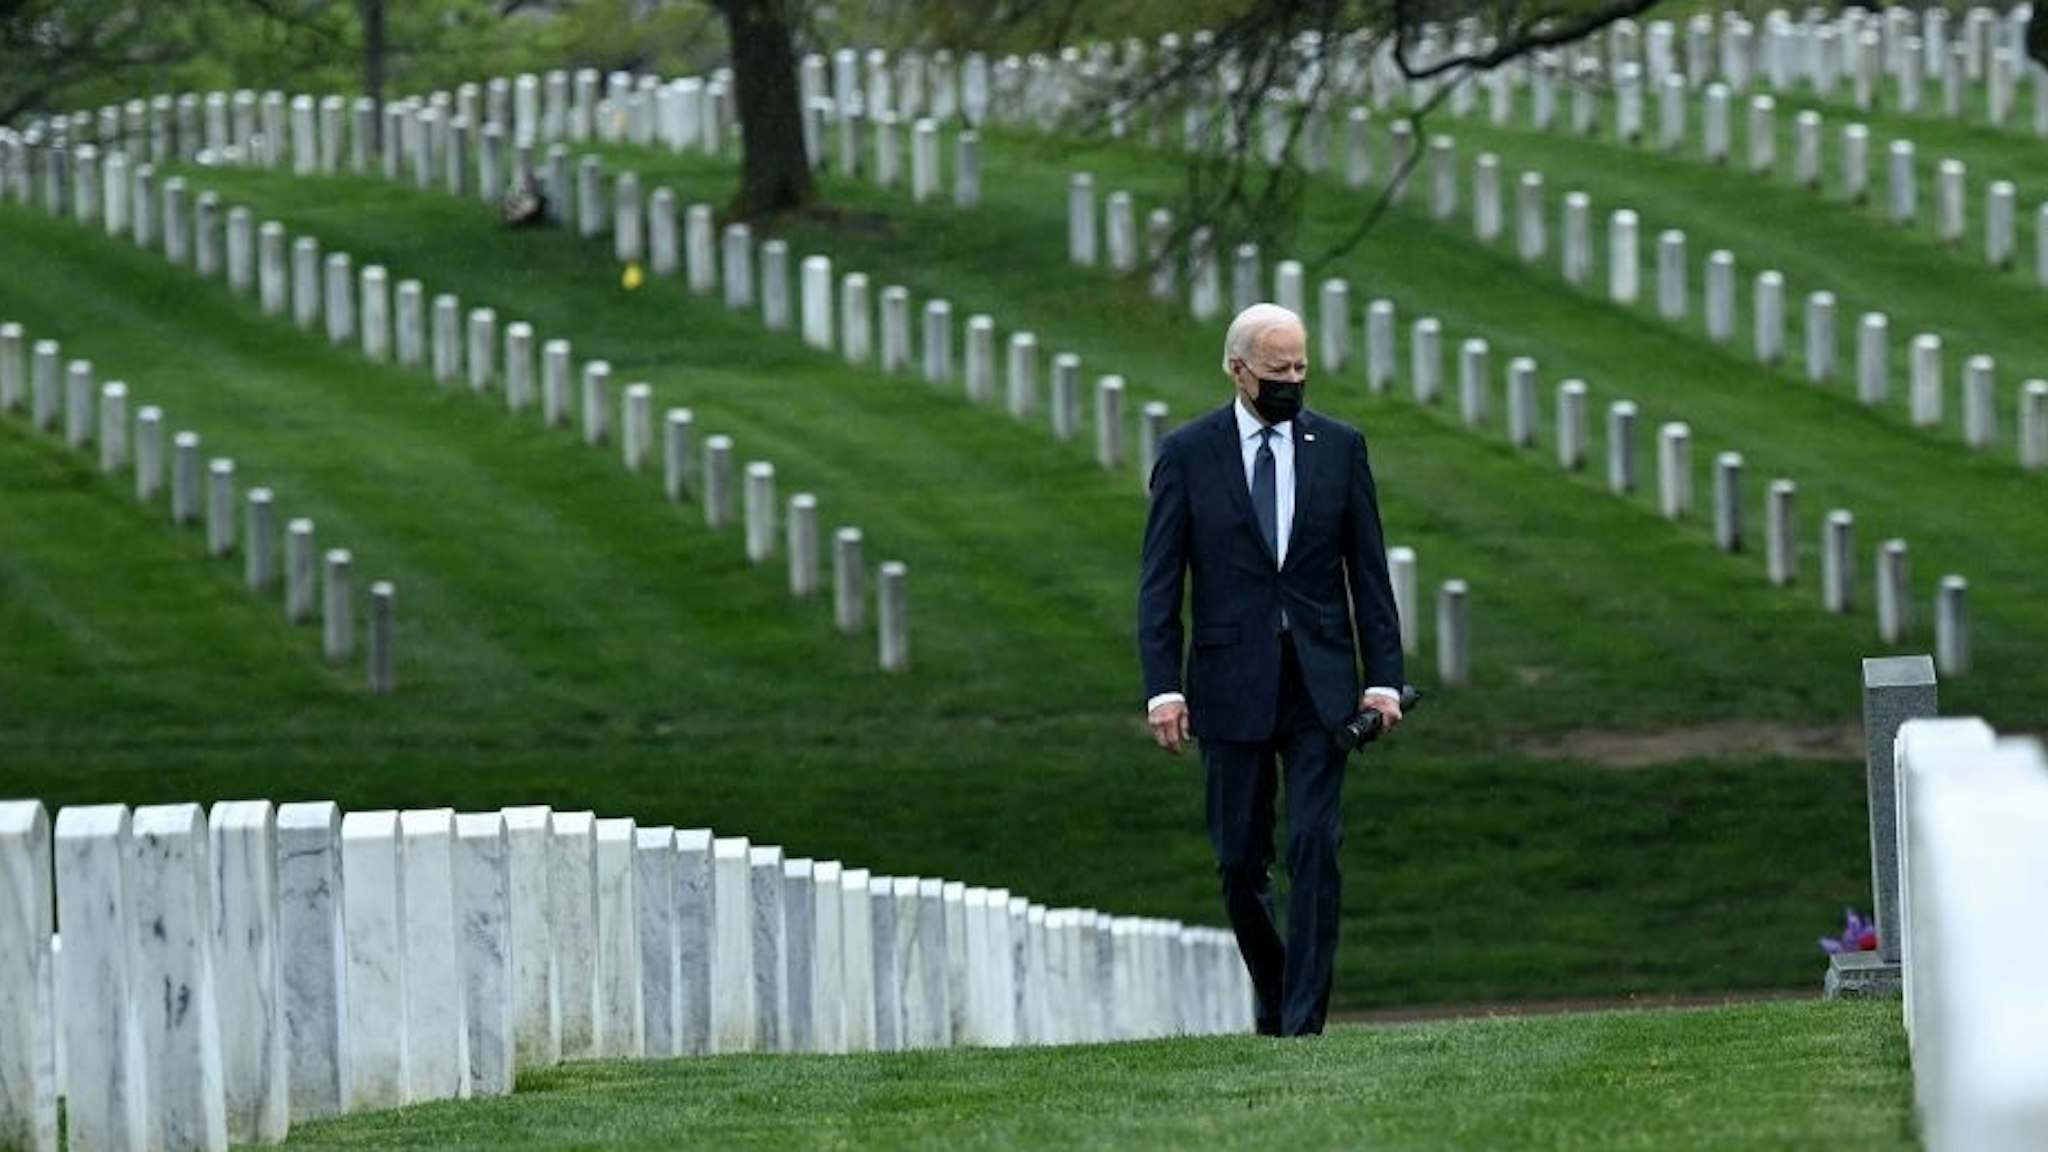 TOPSHOT - US President Joe Biden walks through Arlington National cemetary to honor fallen veterans of the Afghan conflict in Arlington, Virginia on April 14, 2021. - President Joe Biden announced it's "time to end" America's longest war with the unconditional withdrawal of troops from Afghanistan, where they have spent two decades in a bloody, largely fruitless battle against the Taliban. (Photo by Brendan SMIALOWSKI / AFP) (Photo by